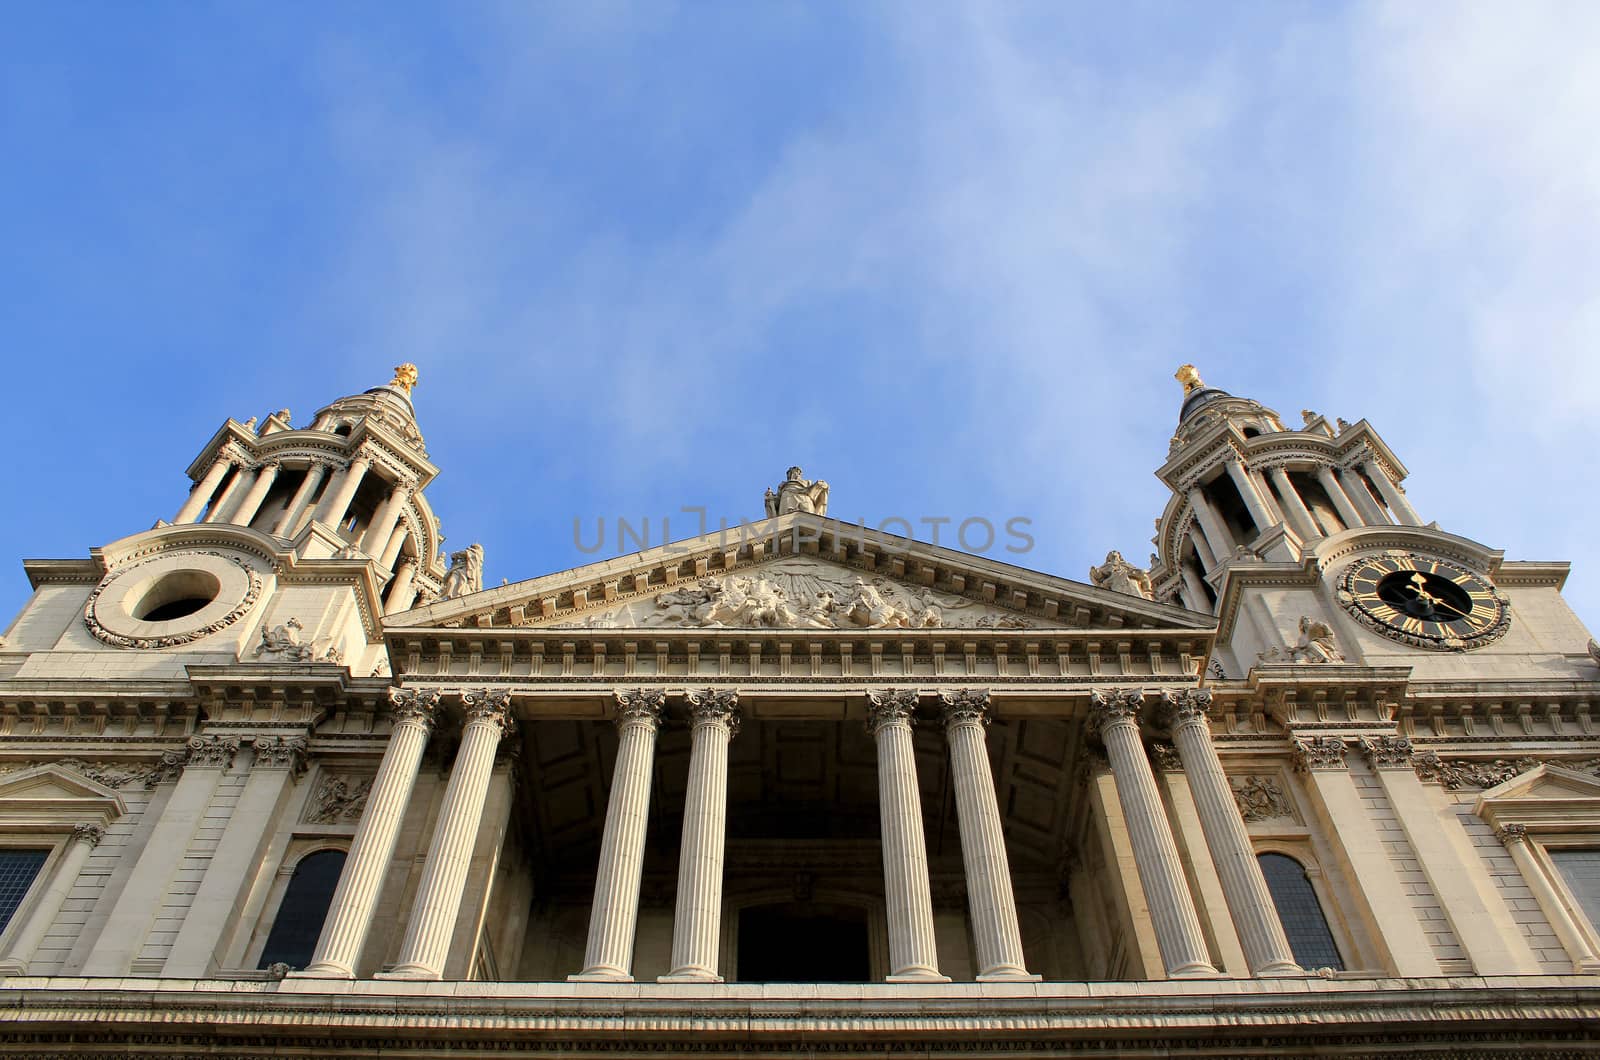 St Paul's Cathedral in London. by ptxgarfield